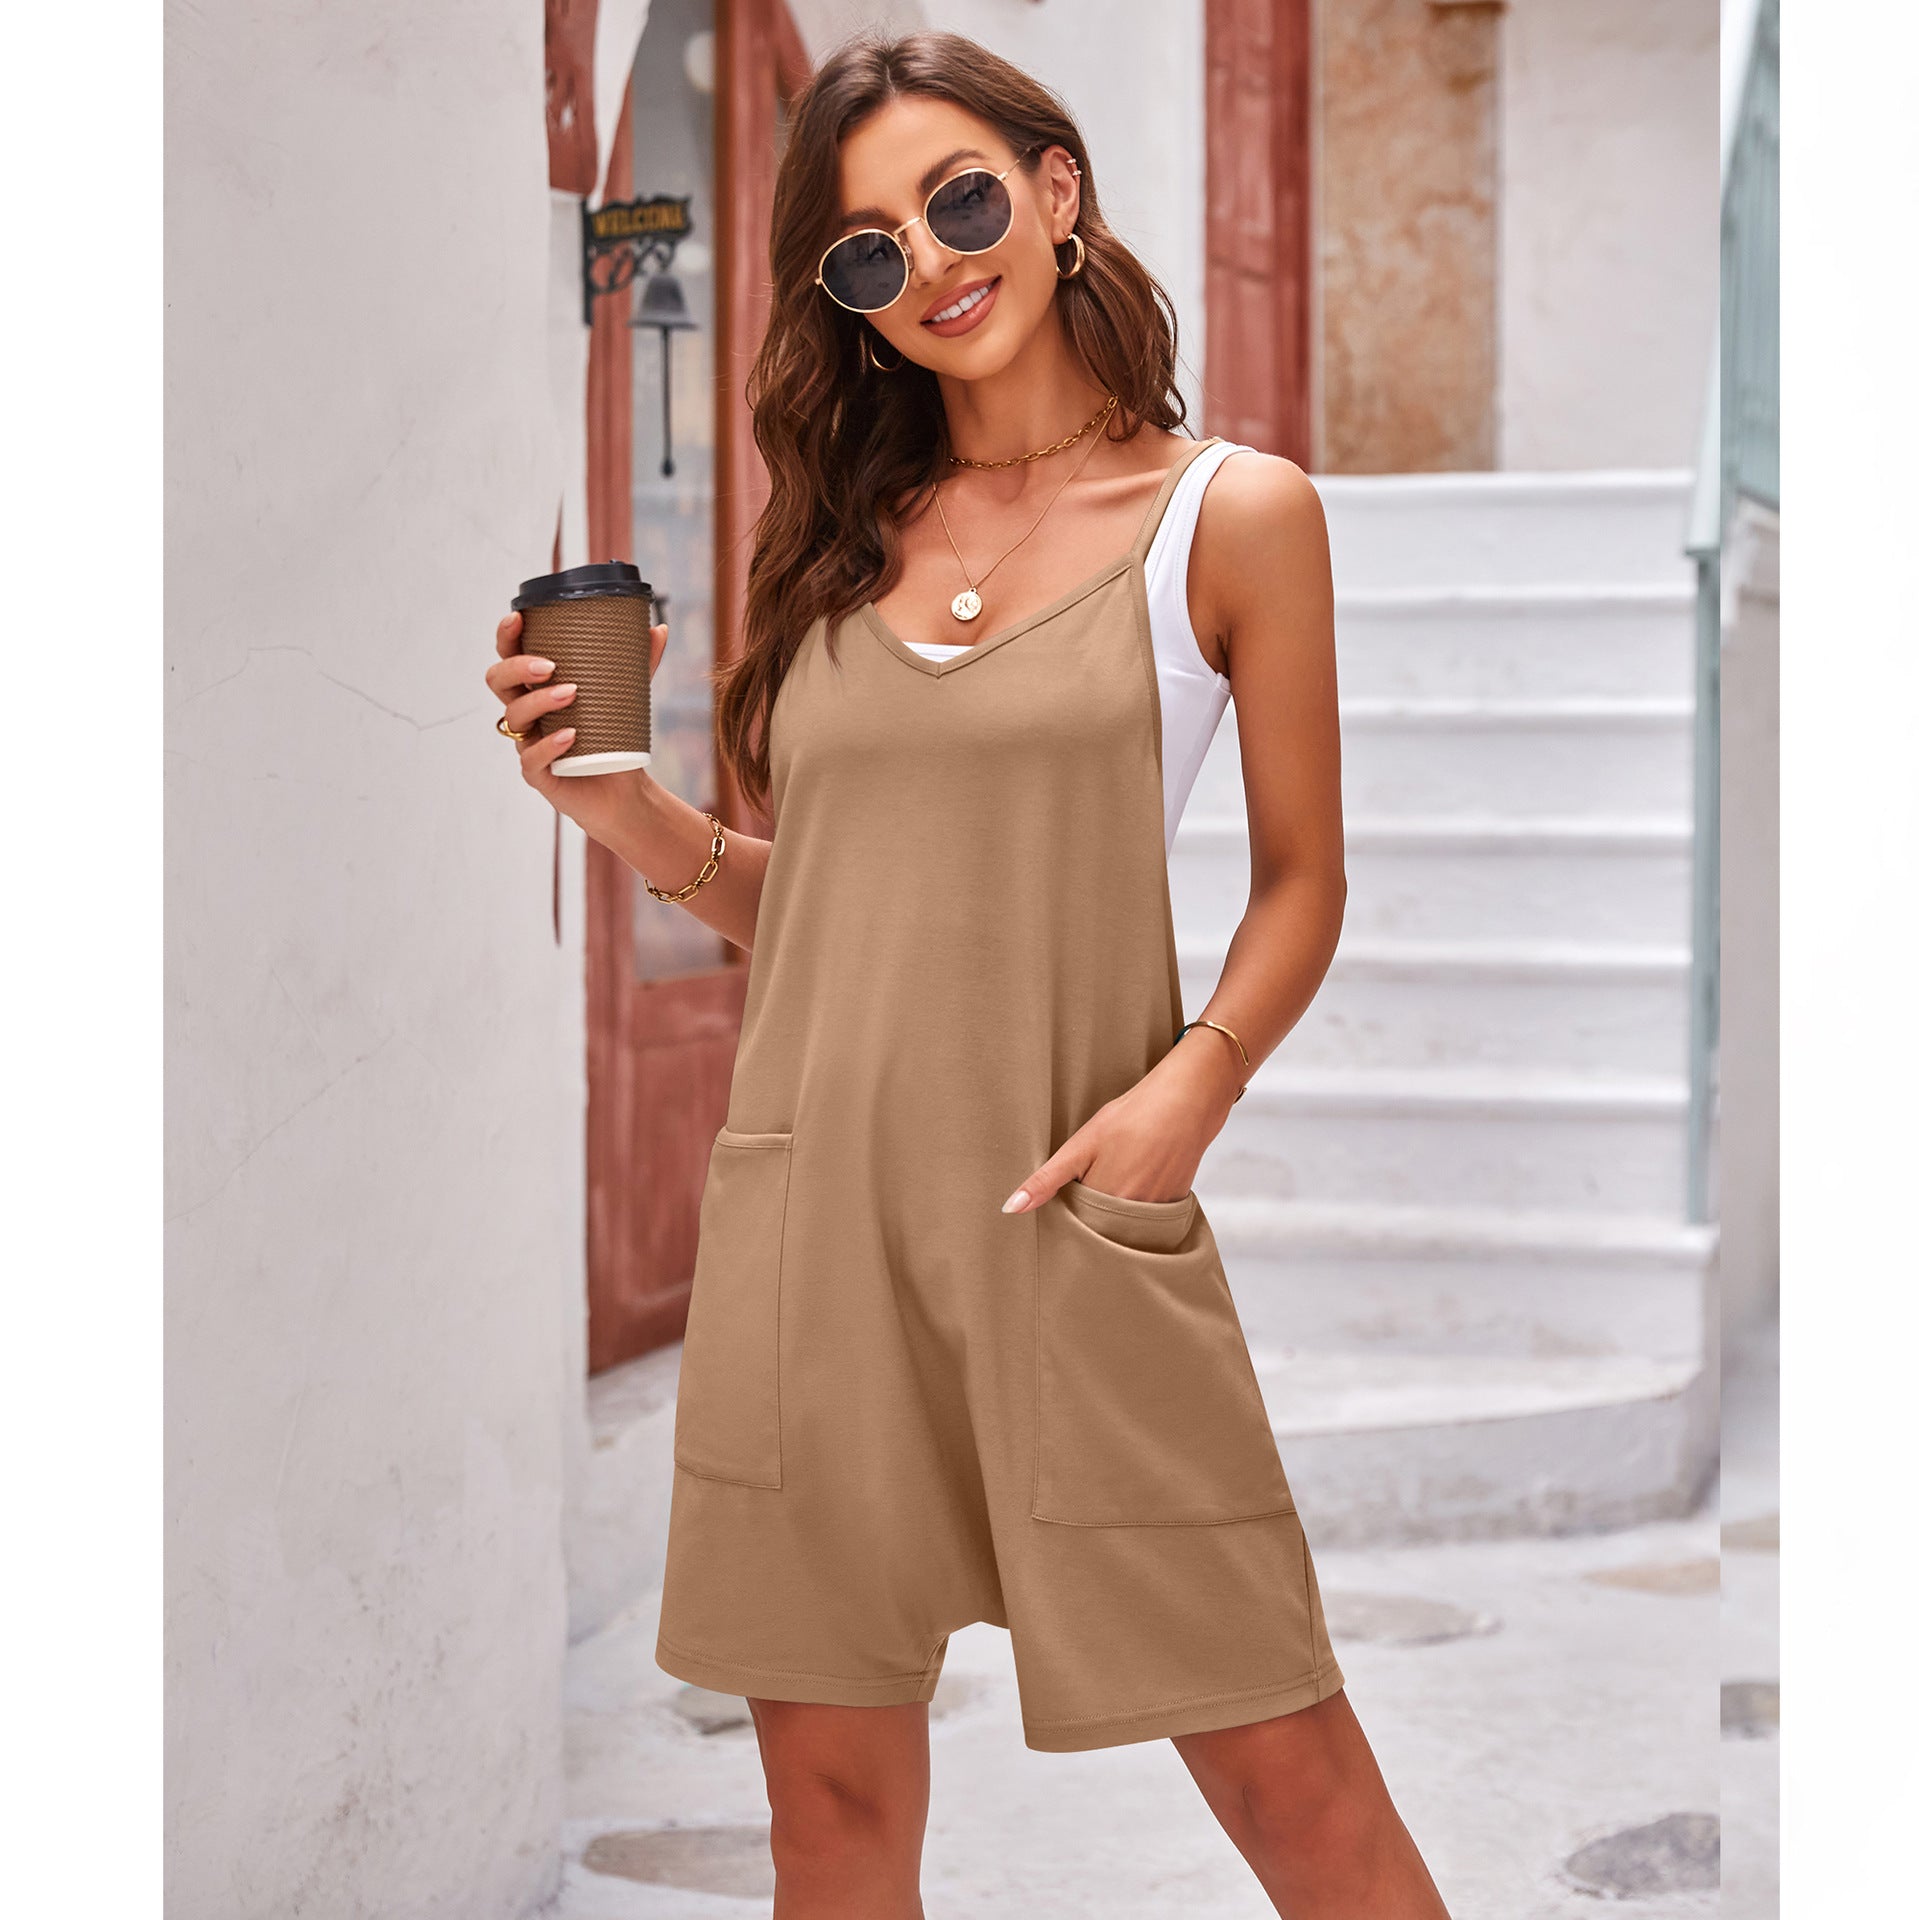 Women's Summer Casual Pocket Spaghetti Straps Knitted Jumpsuits